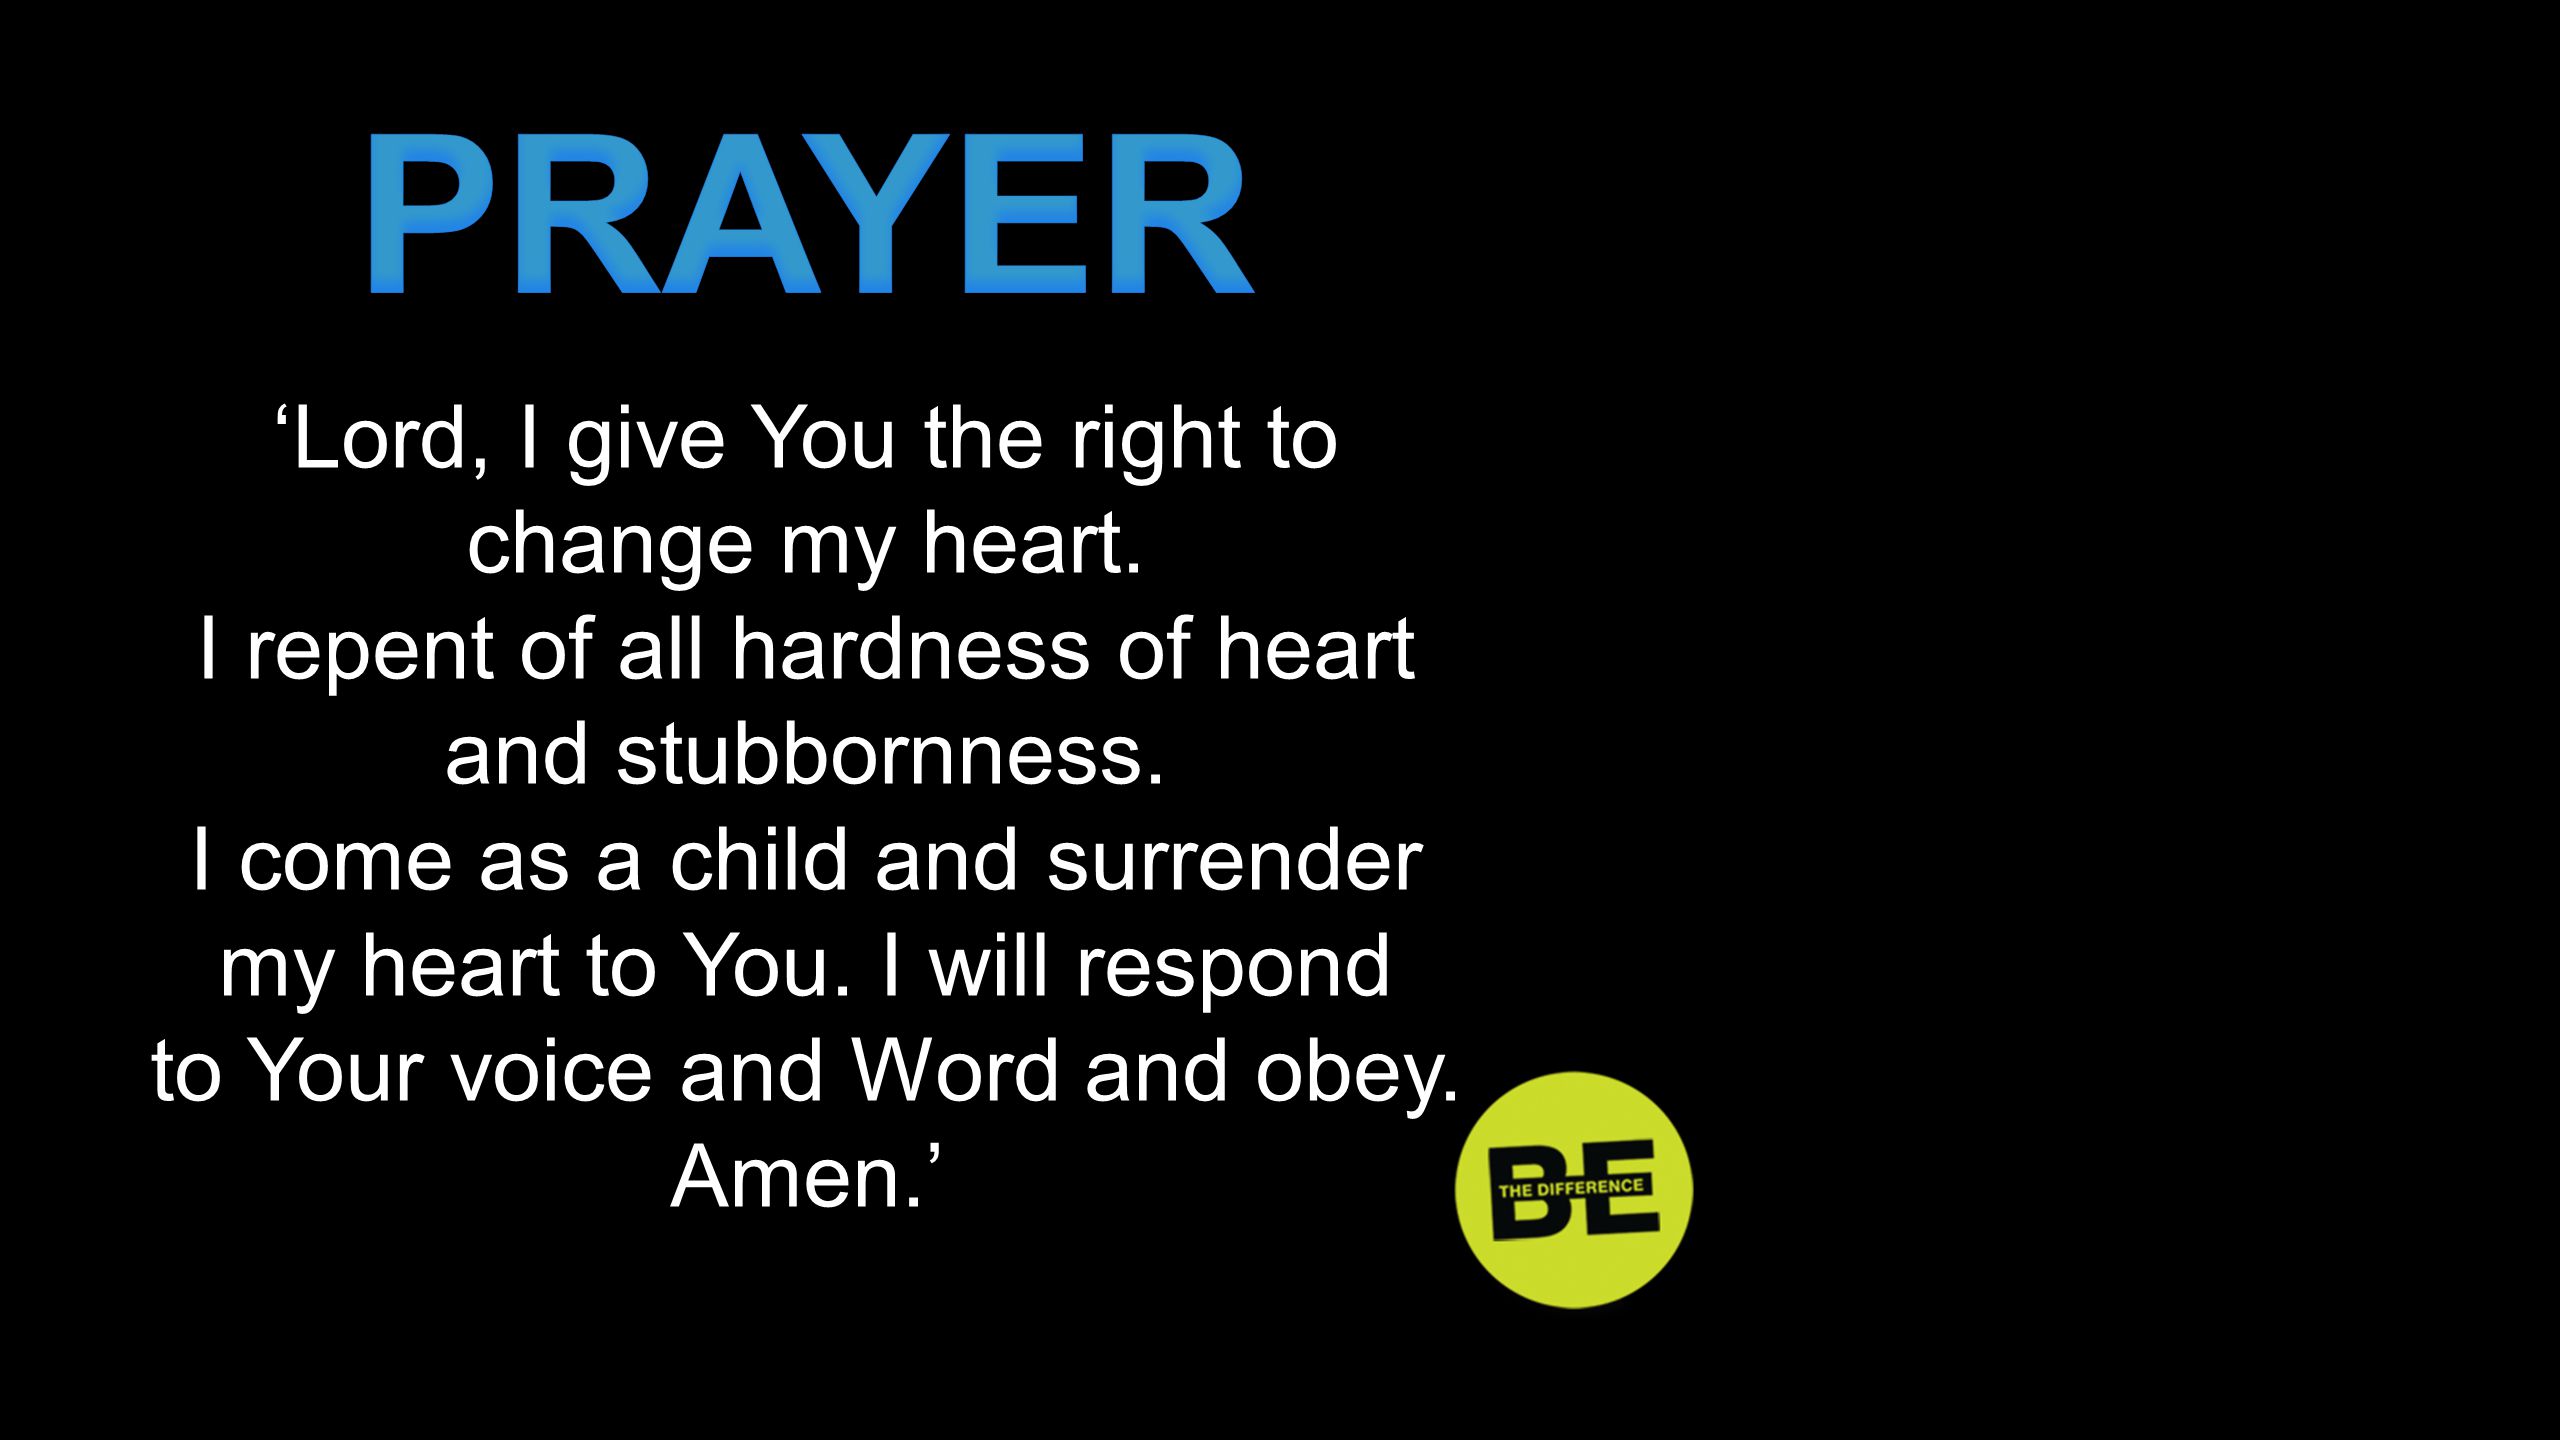 PRAYER ‘Lord, I give You the right to change my heart.